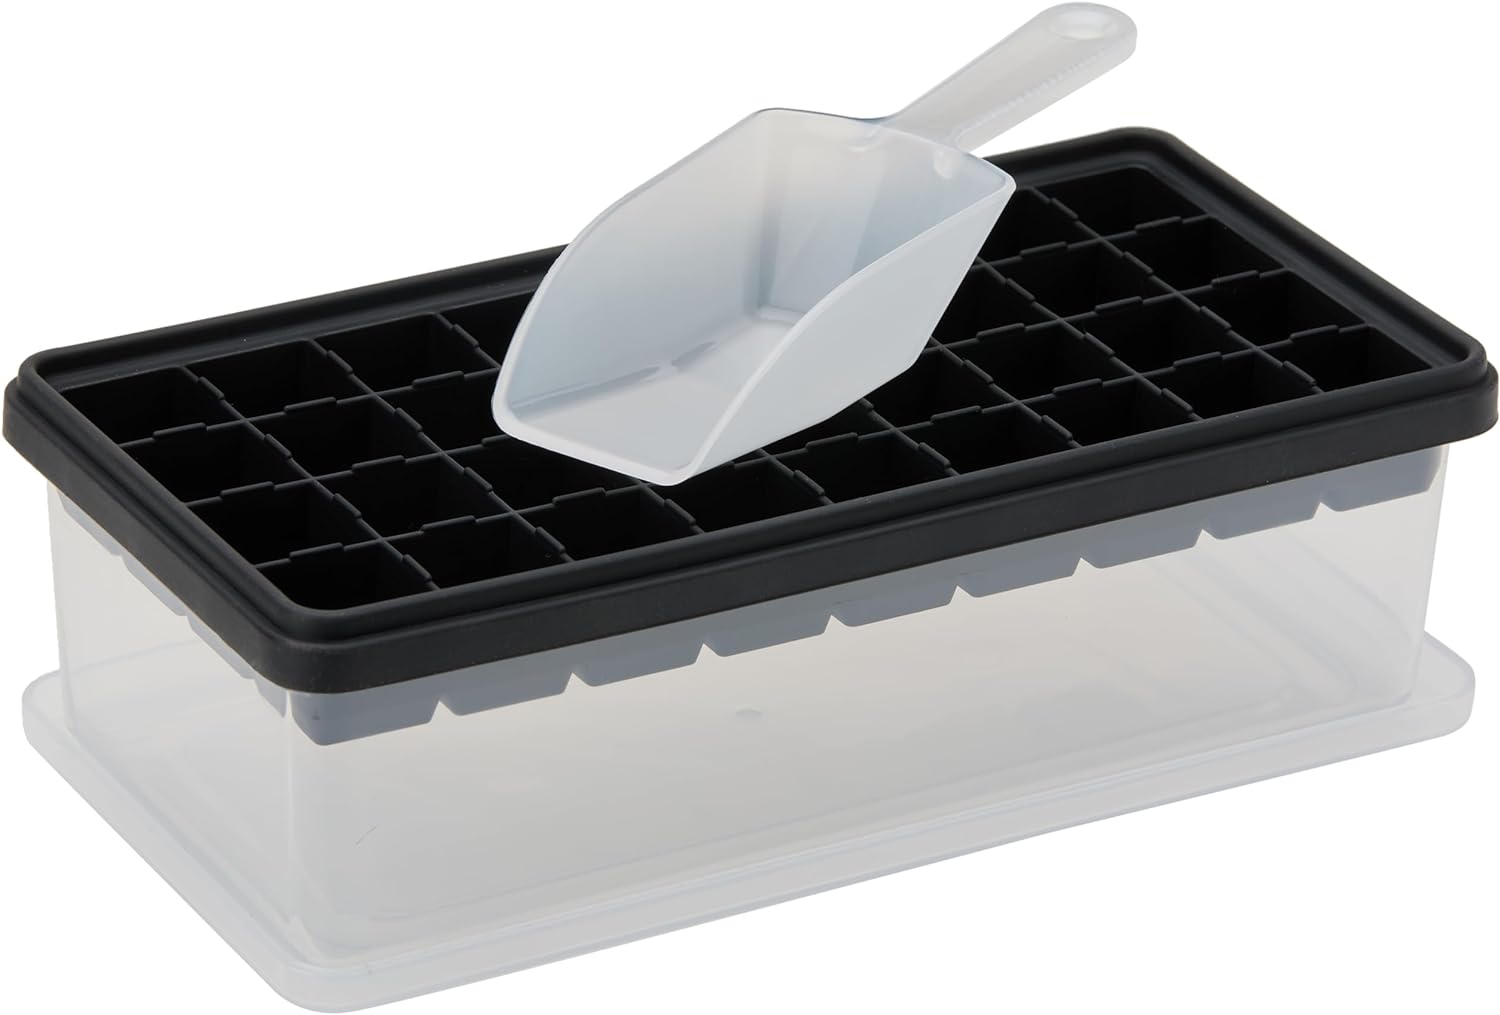 Yoove 36 Nugget Ice Cube Tray With Lid & Bin